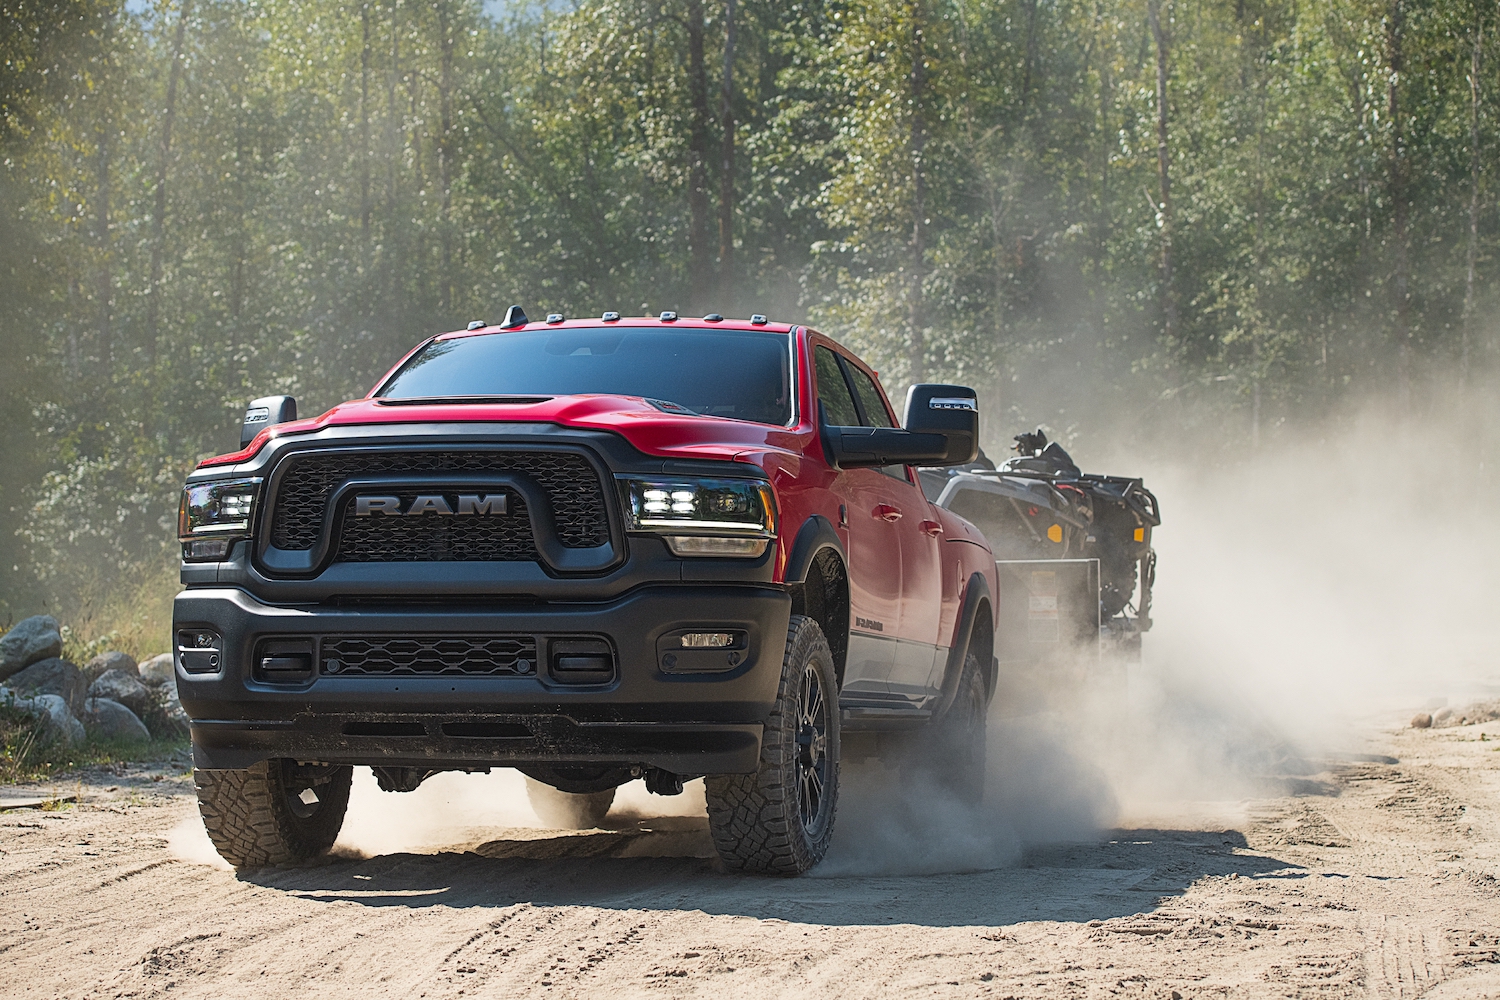 The heavy-duty Ram 1500 rebel 4x4 truck demonstrates its tow rating by pulling a trailer off-road.